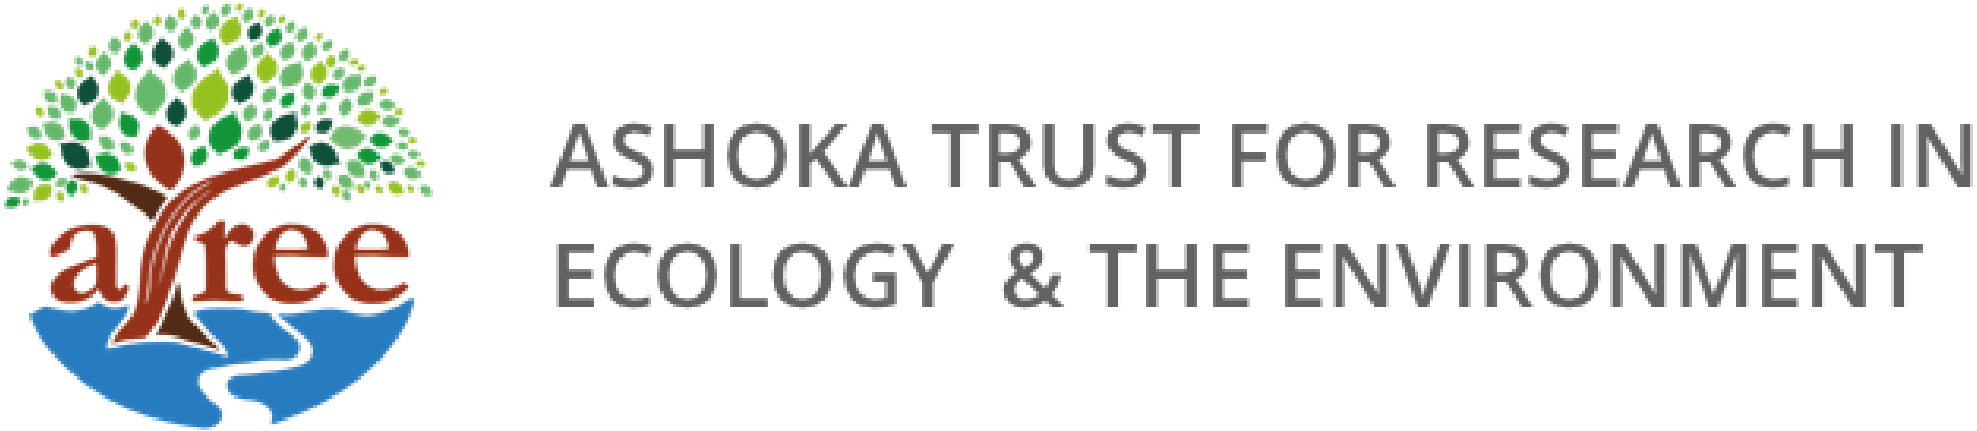 Ashoka Trust for Research in Ecology and the Environment logo